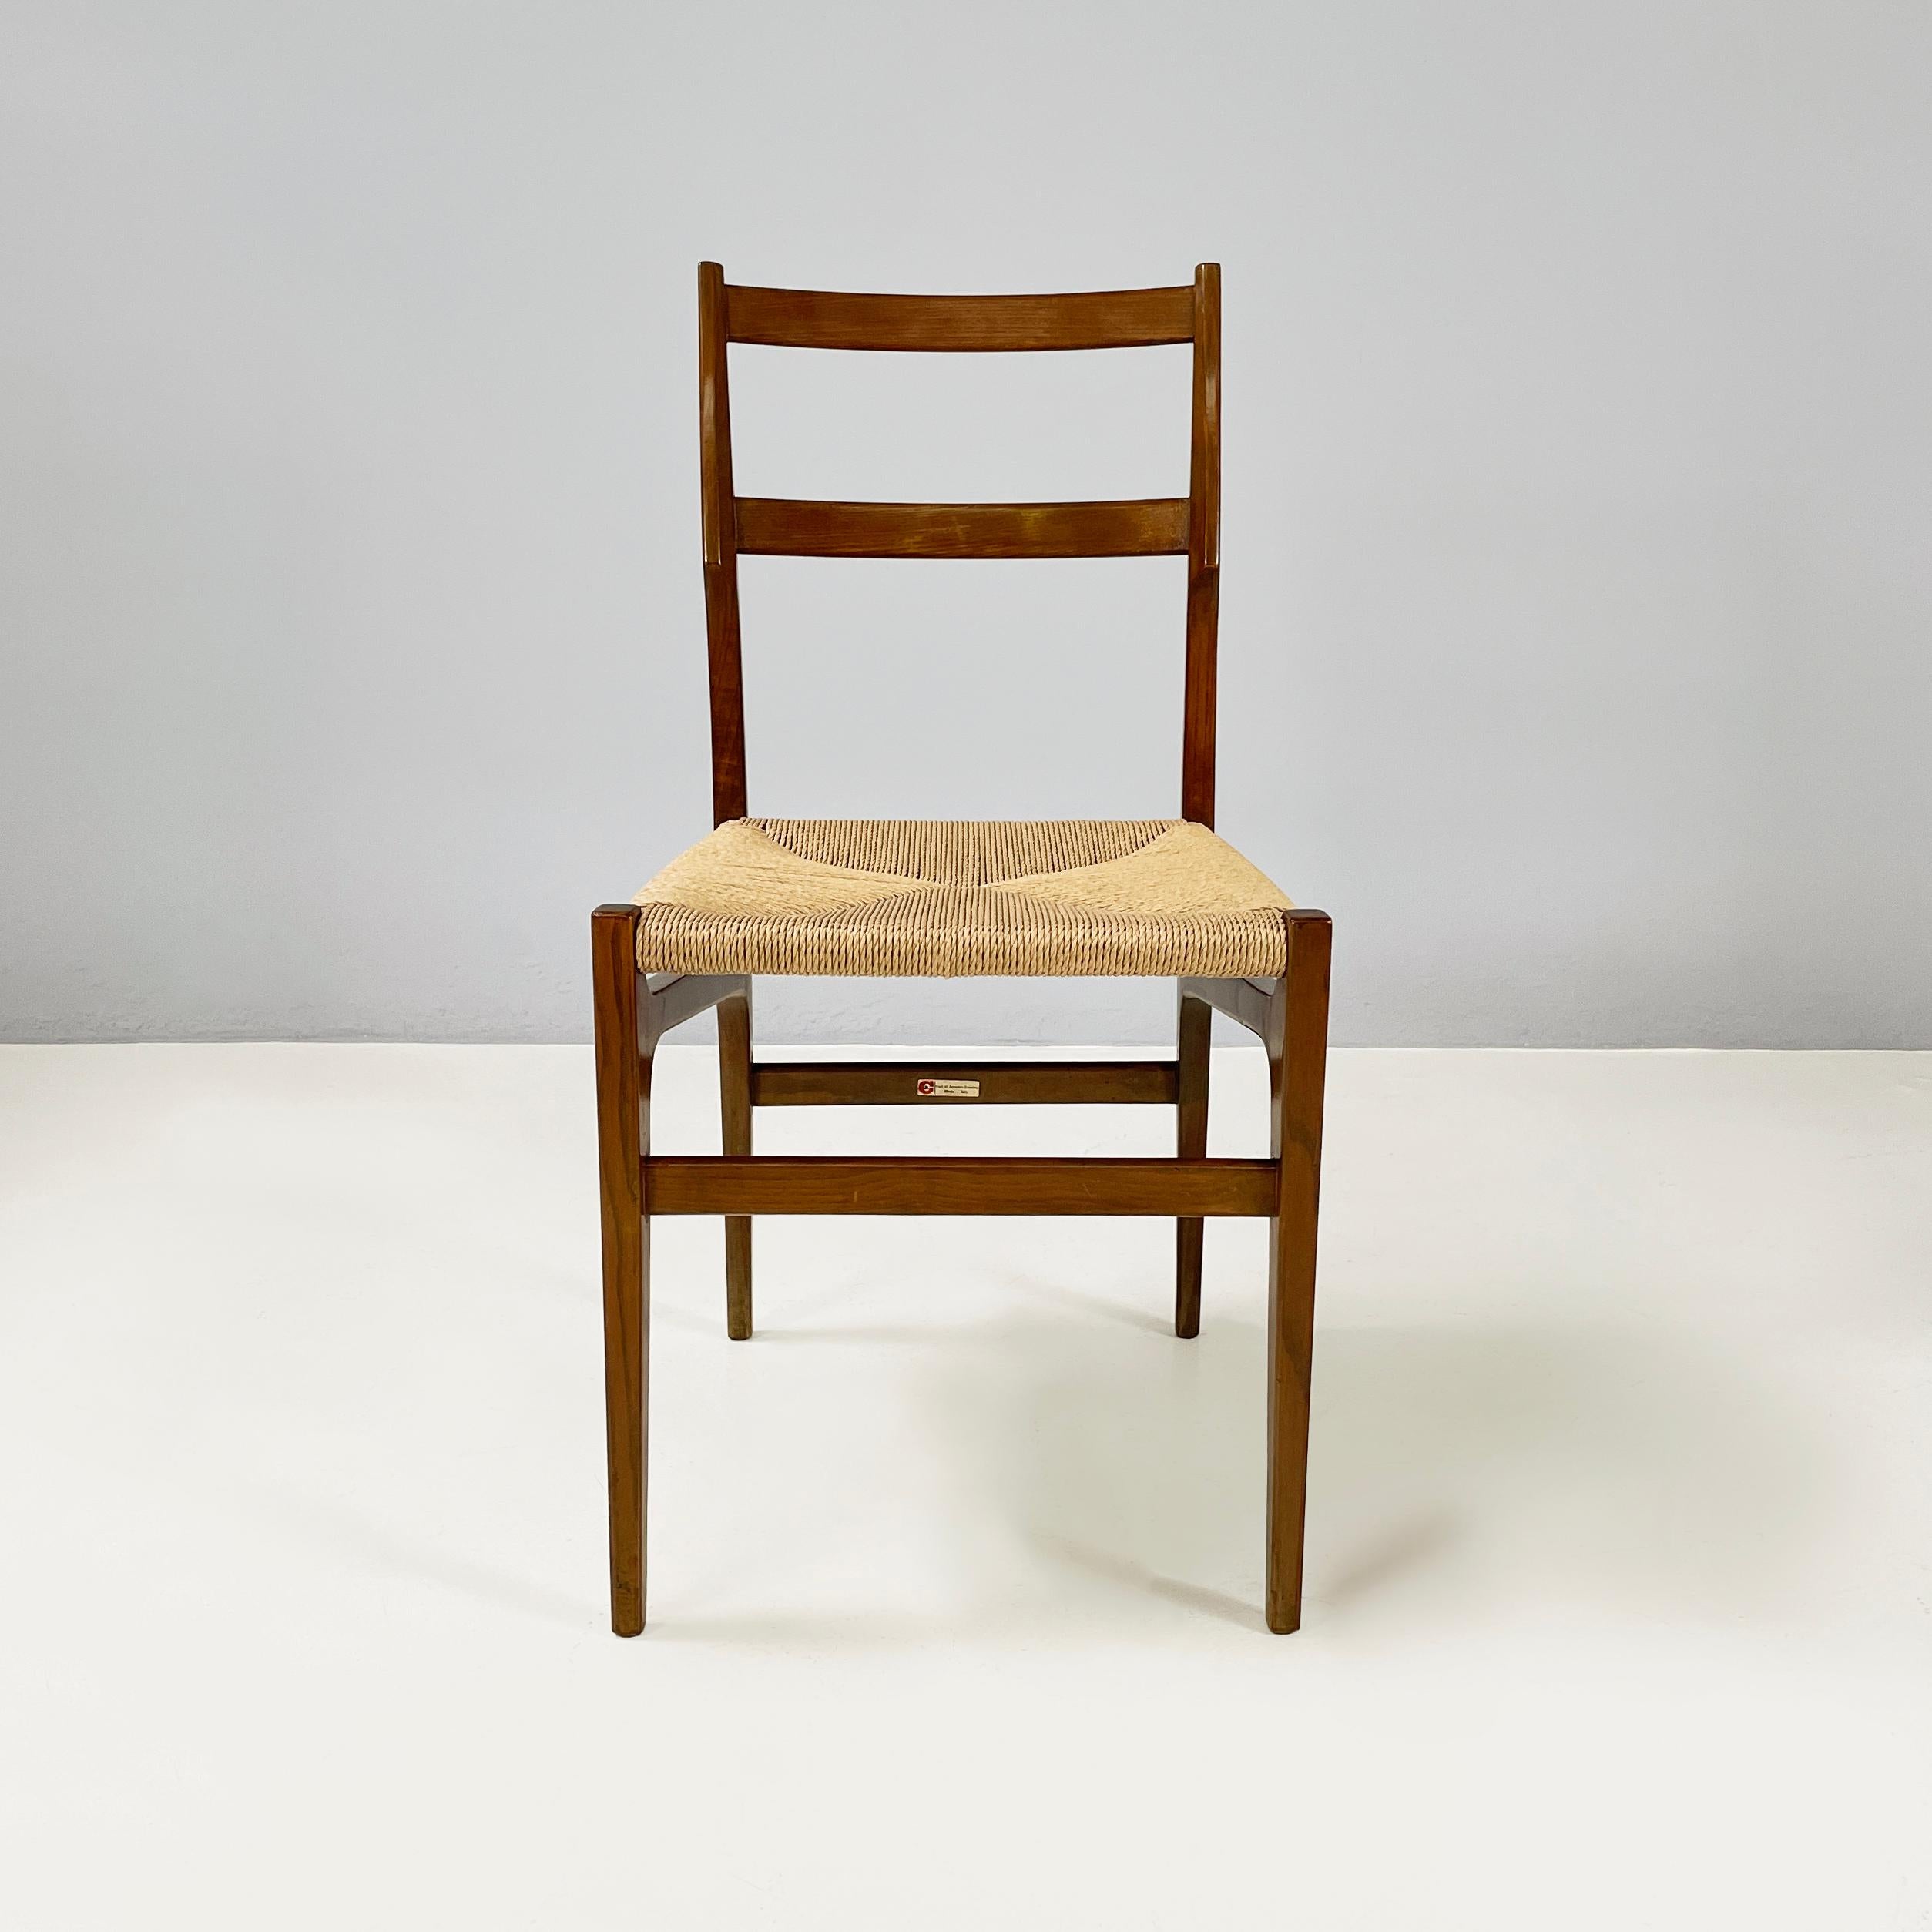 Italian mid-century modern Chairs Parco dei Principi hotel by Gio Ponti for Cassina, 1960s
Pair of iconic chairs with square woven straw seat. The backrest is entirely made of shaped wood. Round section wooden legs.
Produced by Cassina in 1960s and